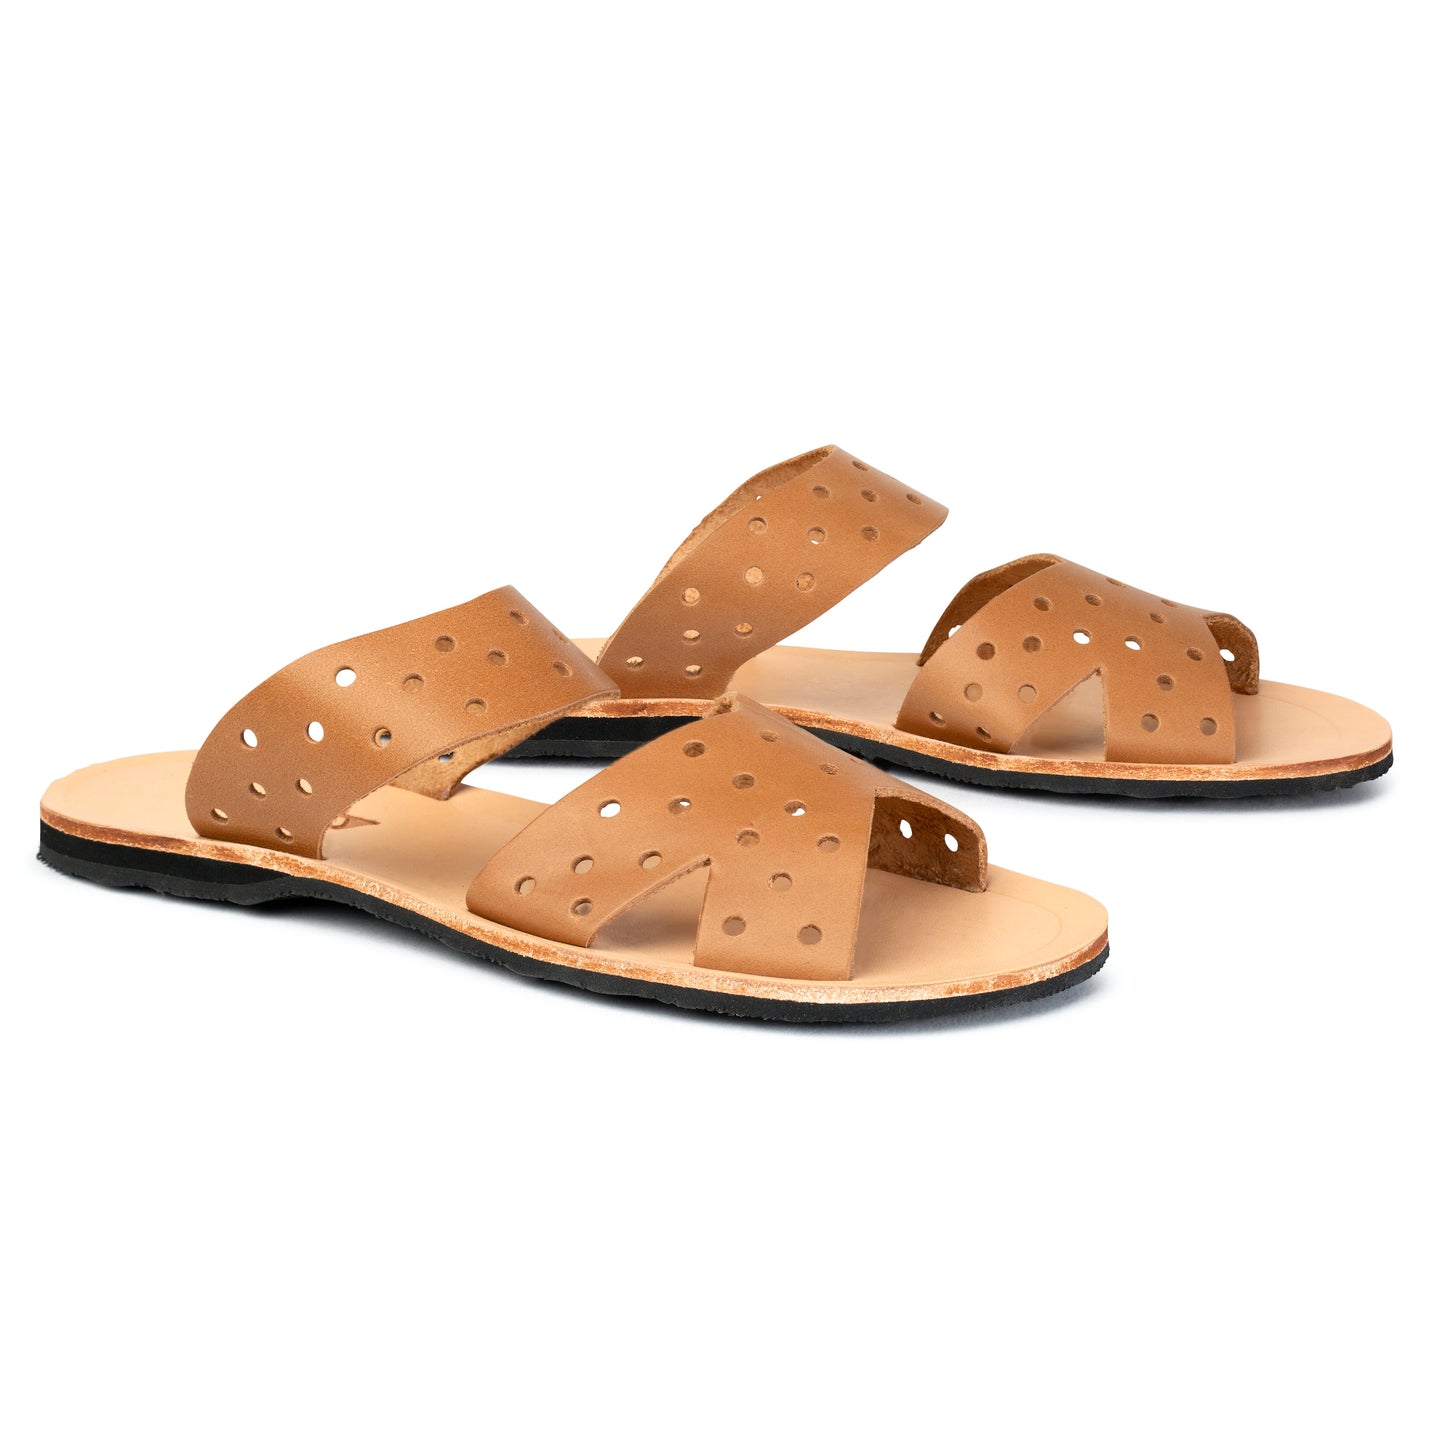 Mabel Leather Sandal - Light Brown Perforated